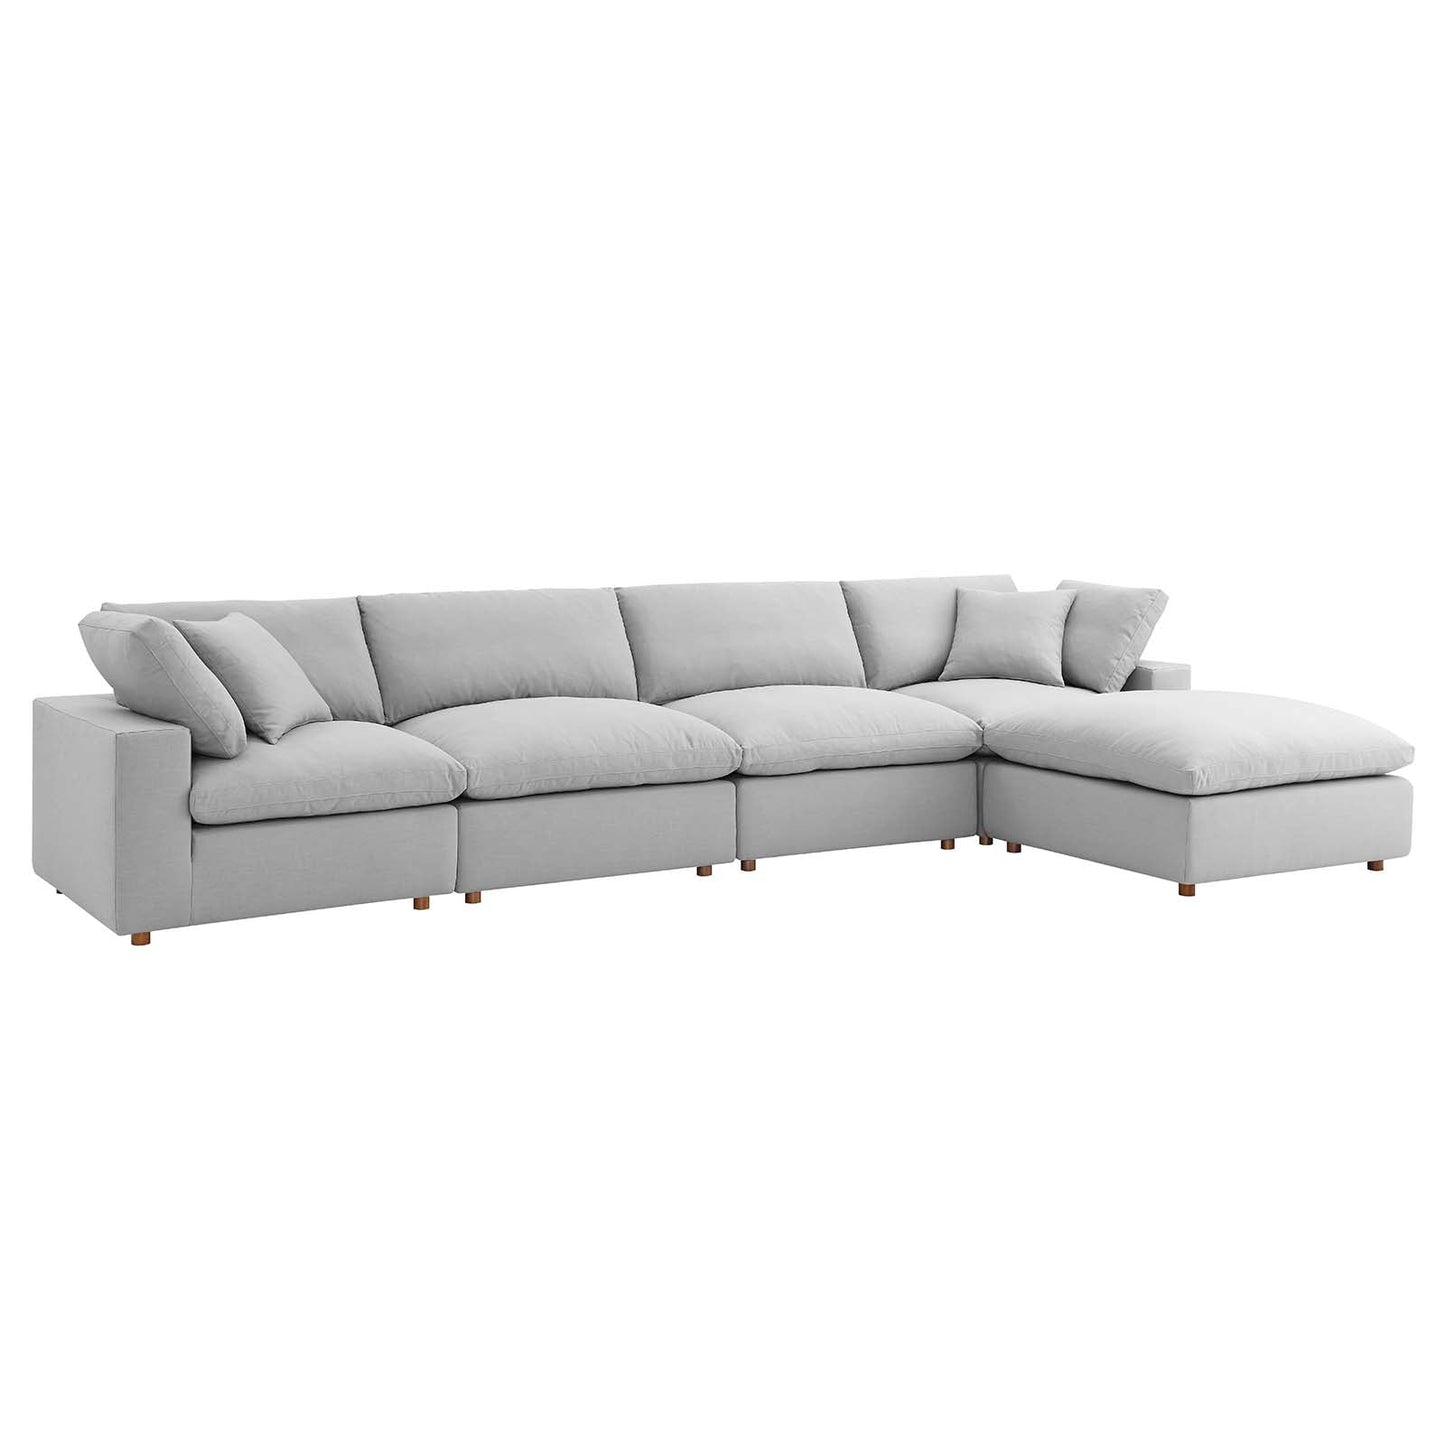 Connie Down Filled Overstuffed 5 Piece Sectional Sofa Set